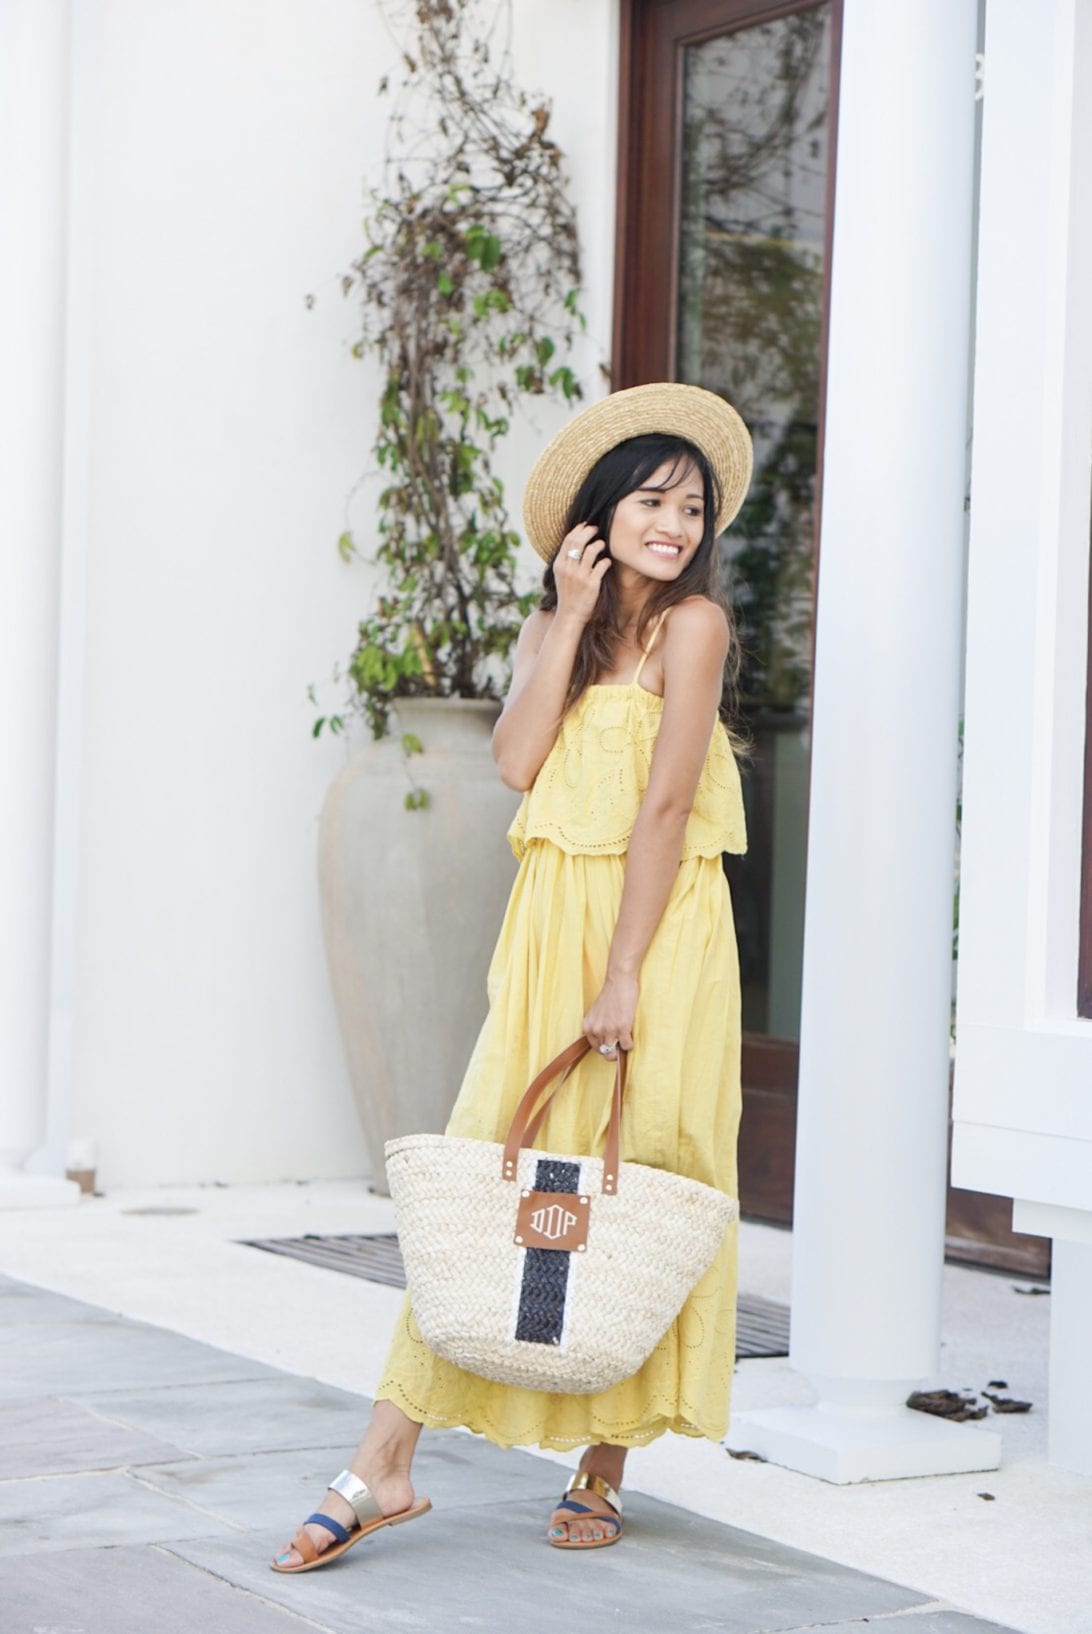 Tickle Me Picnic Embroidery Cotton Maxi Dress, yellow dress, beach dress, maxi dress, summer dress, dresses under $100, tote bag, straw bag, monogrammed straw bag, Marleylilly, alys beach